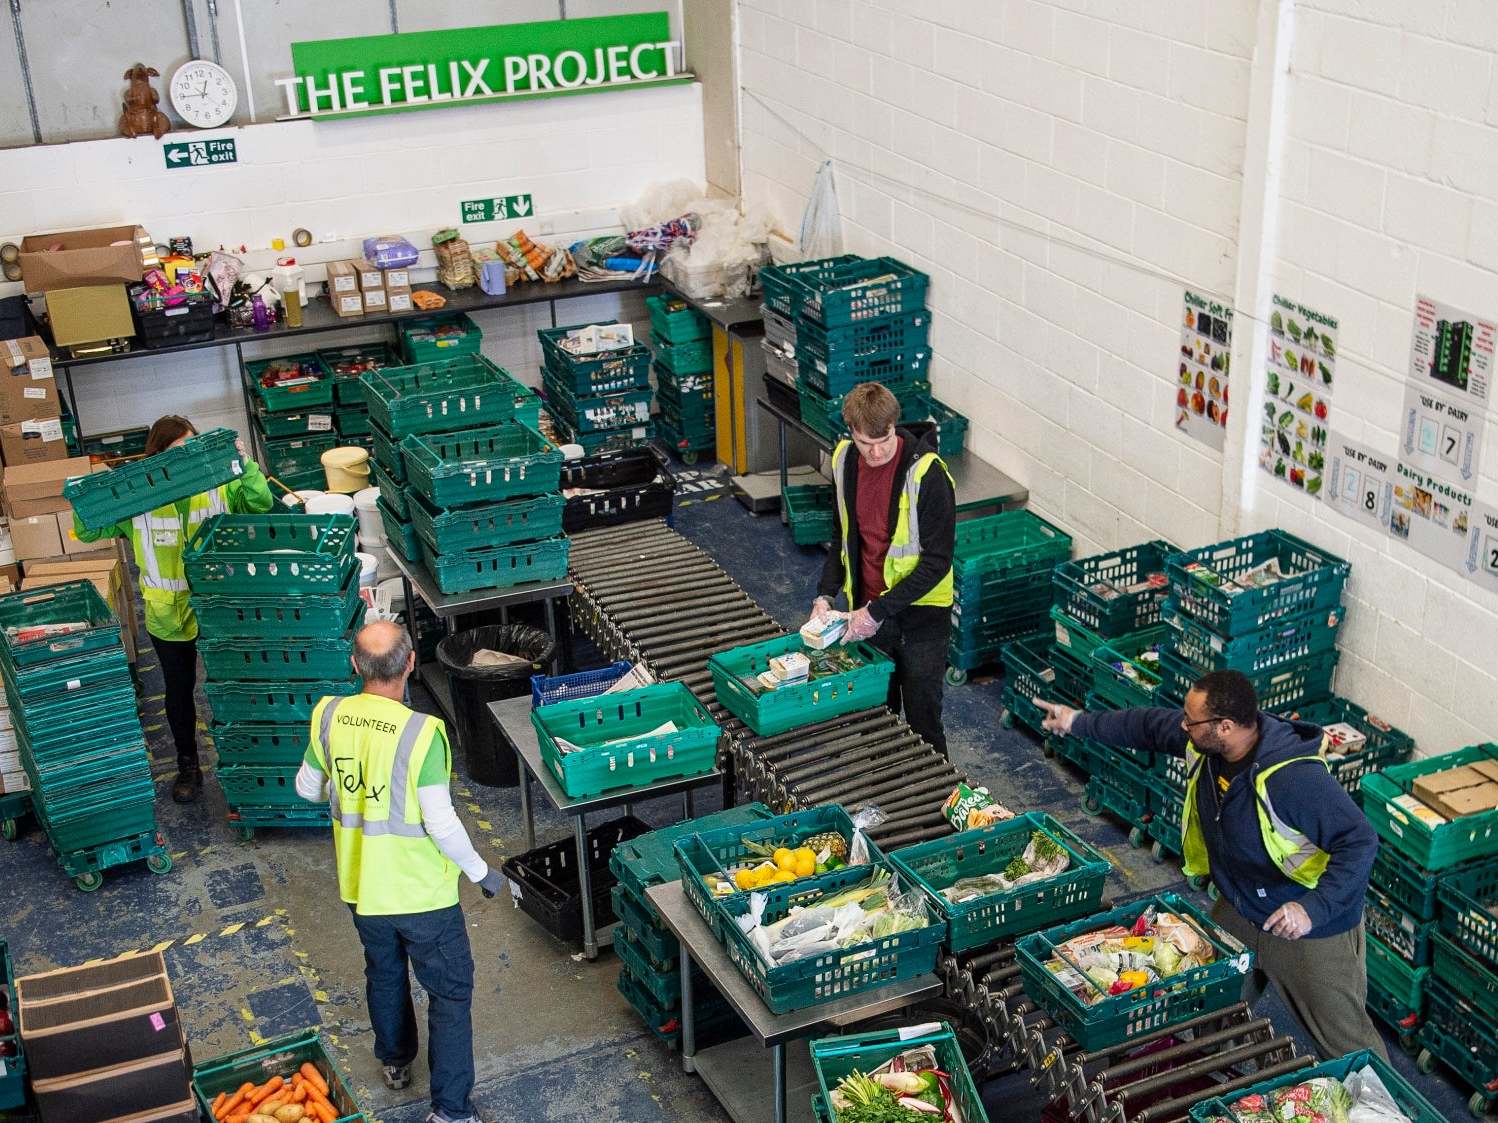 Food deliveries from our appeal partner The Felix Project have been supporting the vulnerable throughout lockdown